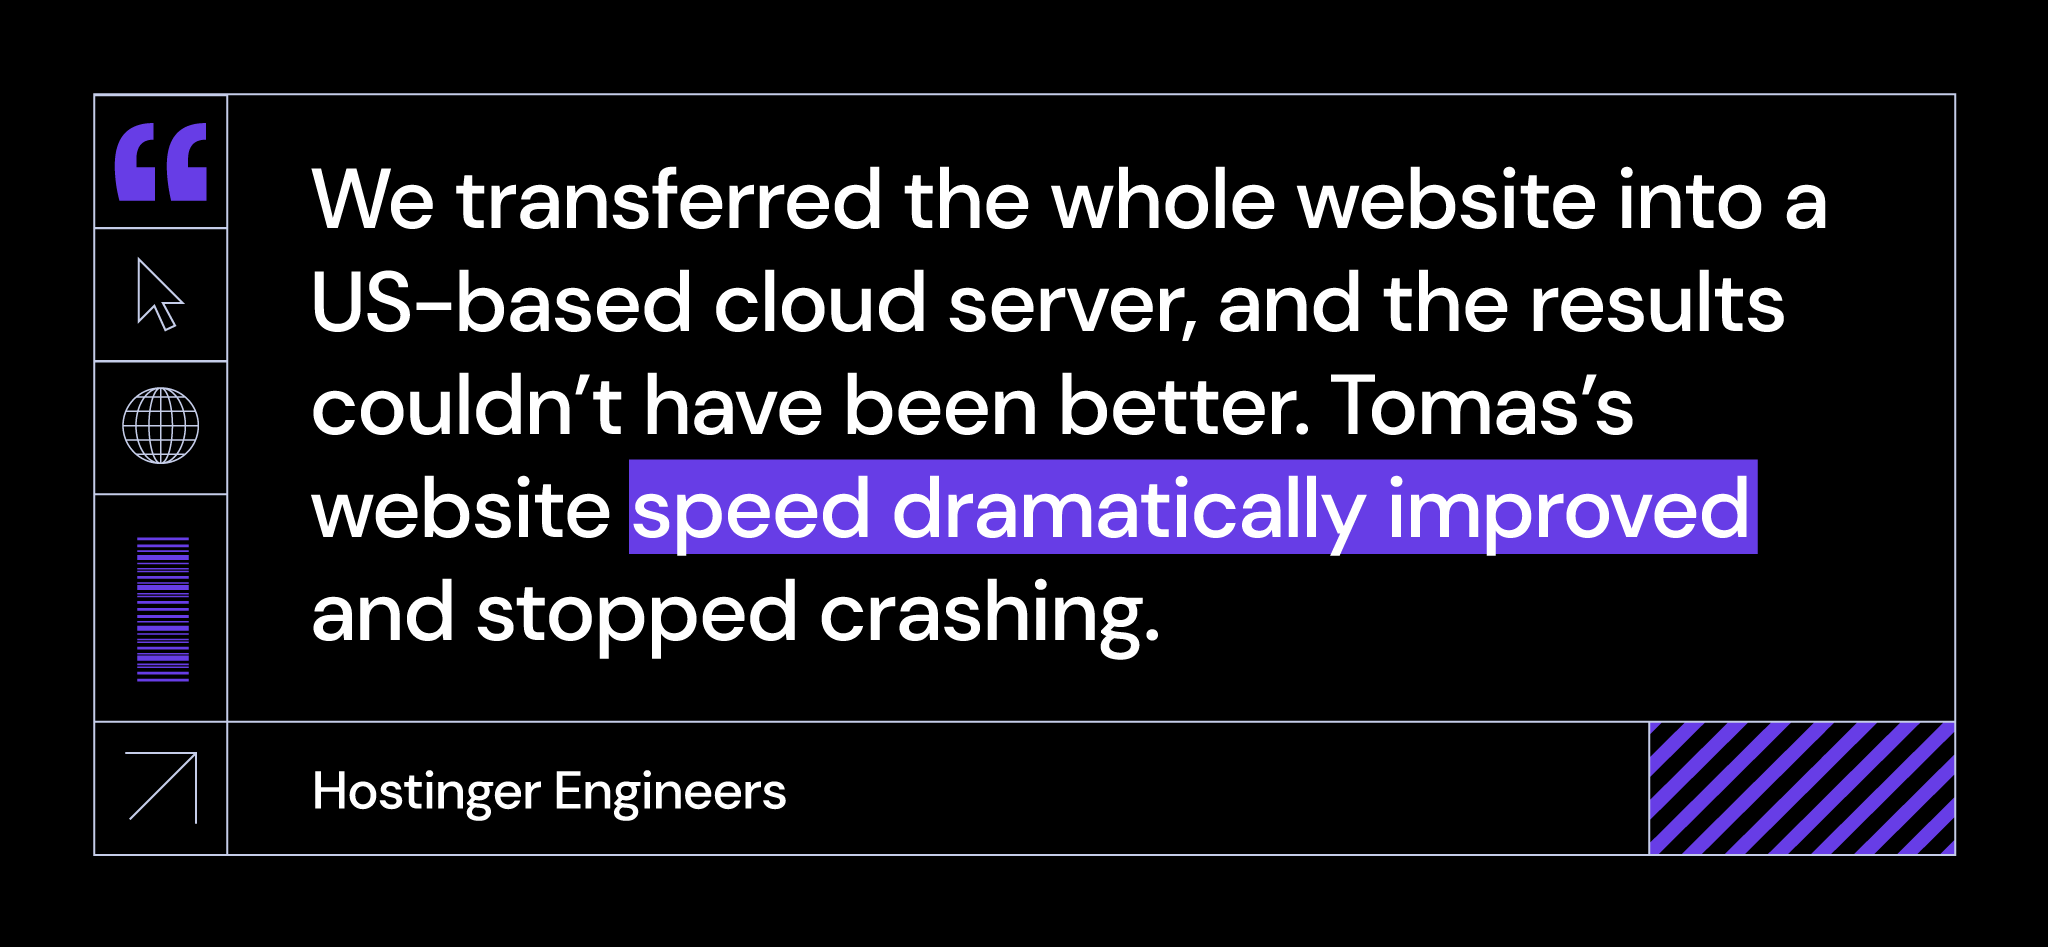 Quote by Hostinger's engineers on how much Tomas' website speed improved after migrating the site to a US-based cloud server